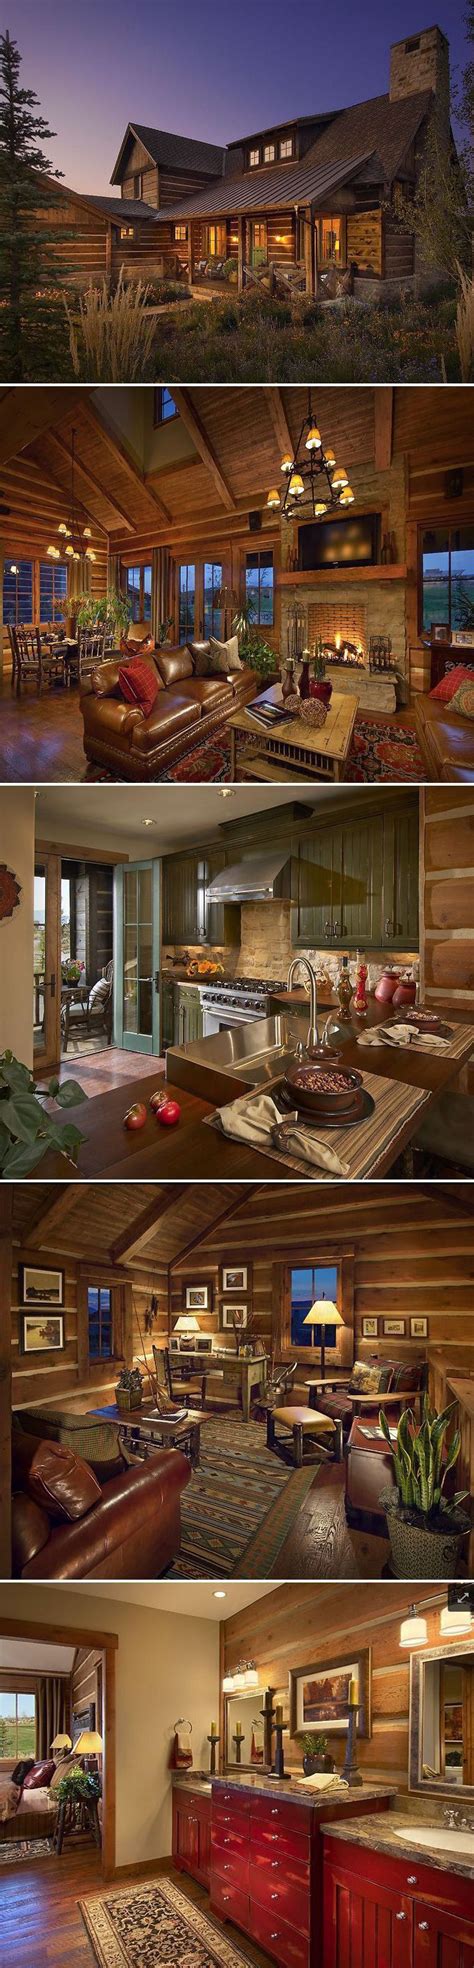 Pin By Autumn Jacunski On Home In The Mountains Log Cabins Wood